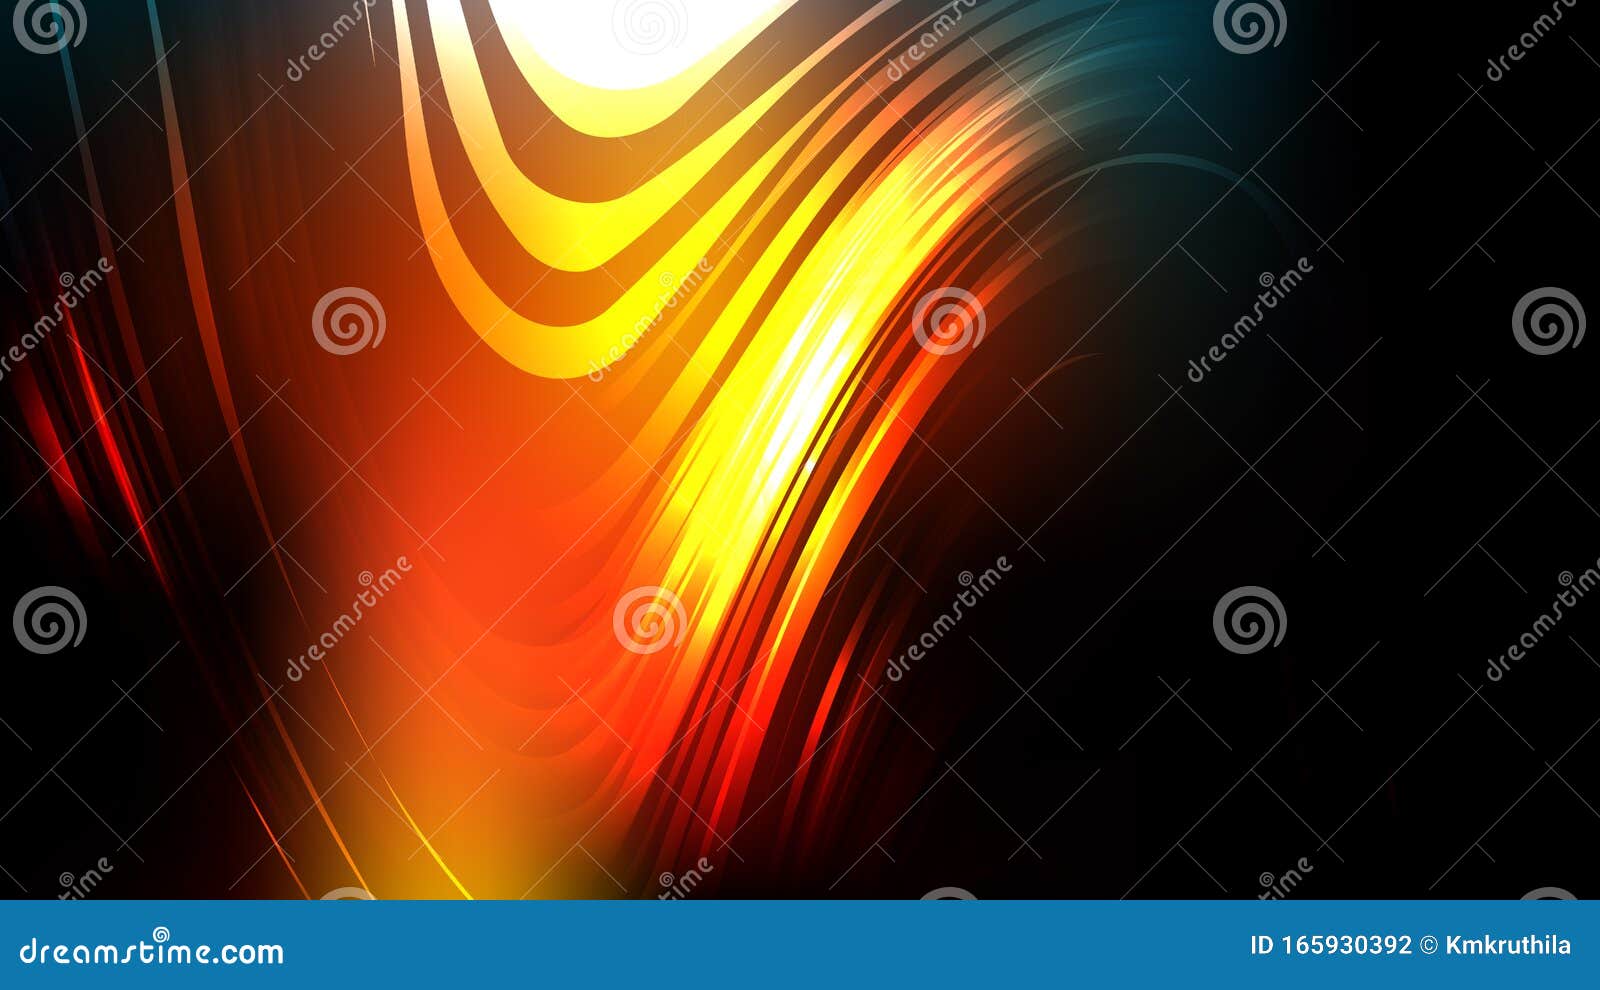 Abstract Black Red and Yellow Background Illustrator Stock Vector -  Illustration of illumination, graphics: 165930392